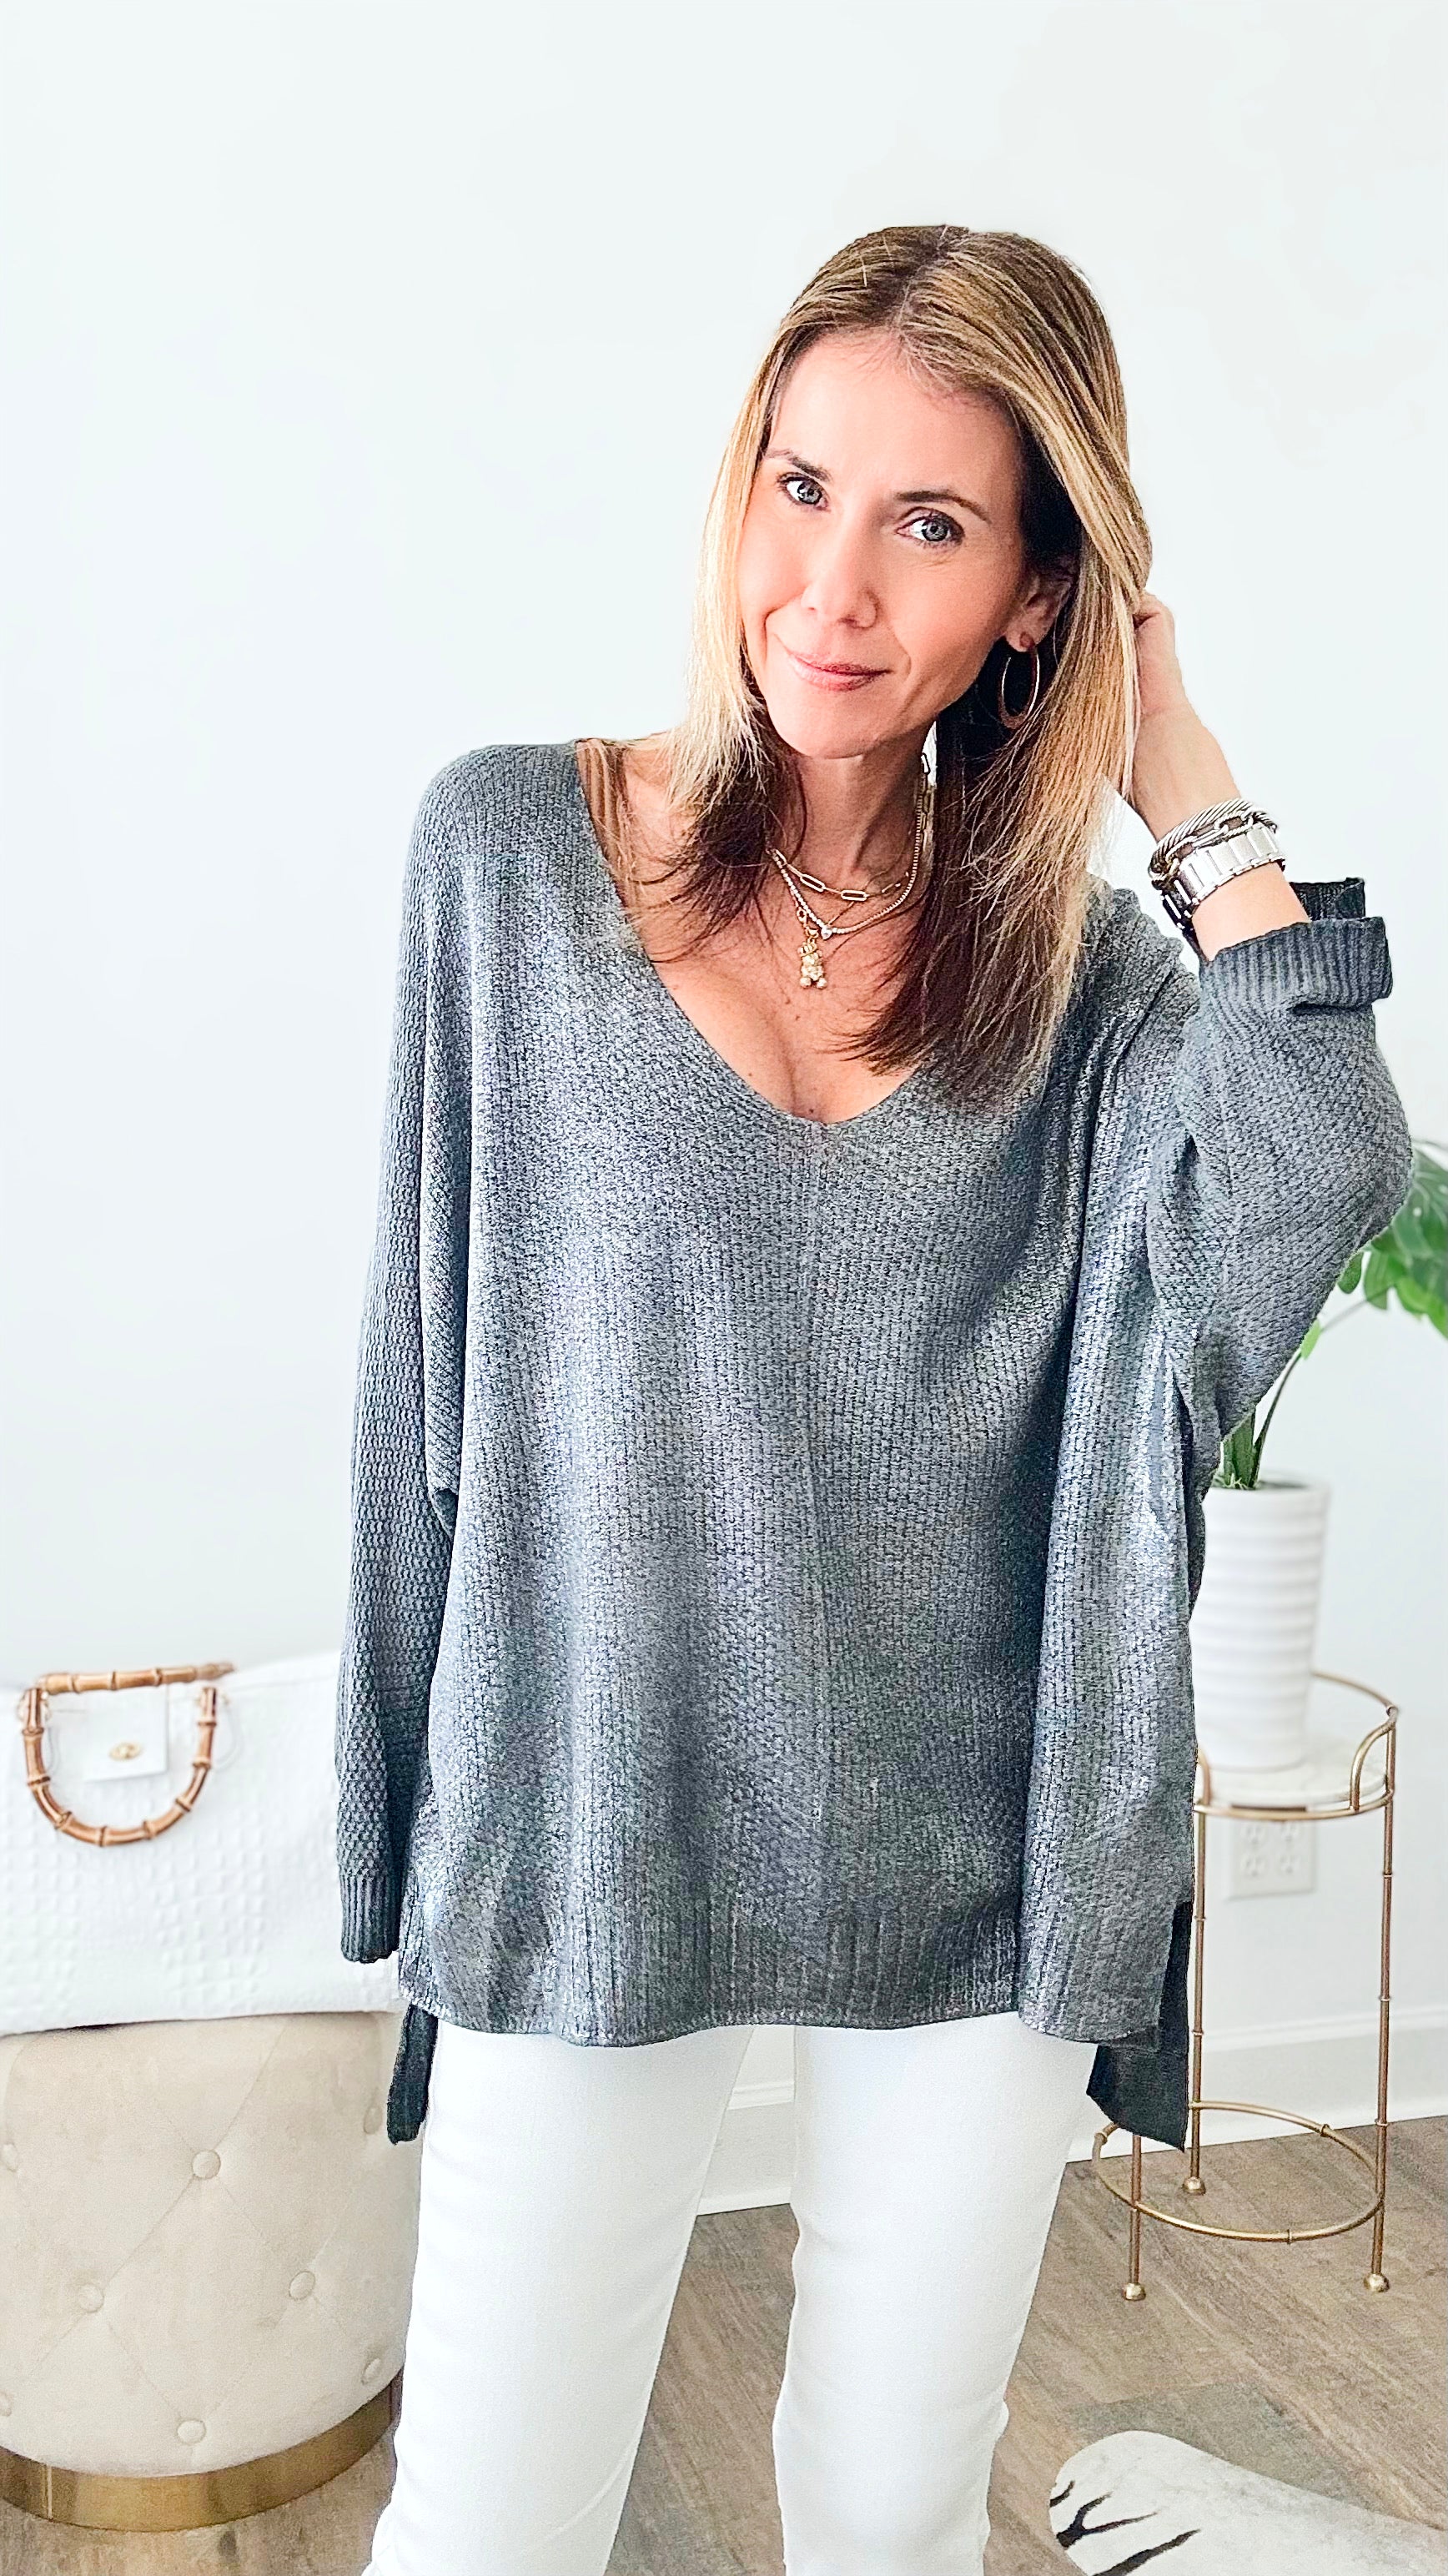 Shimmer Front Italian Sweater - Dark Grey-140 Sweaters-moda italia-Coastal Bloom Boutique, find the trendiest versions of the popular styles and looks Located in Indialantic, FL